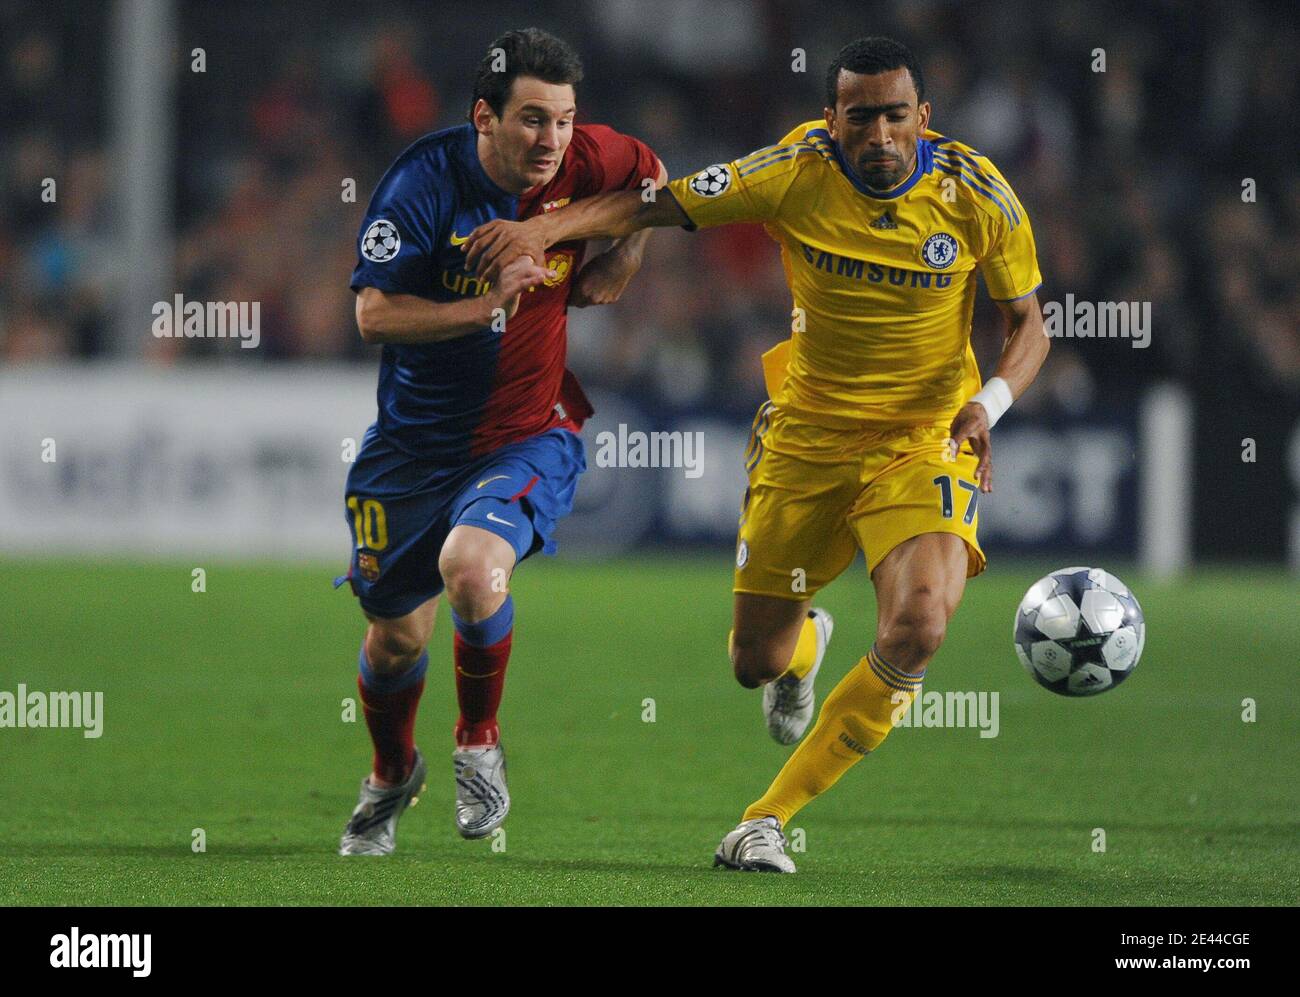 Fc Barcelona S Lionel Messi And Chelsea S Jose Bosingwa During The Uefa Champions League Semi Final First Leg Barcelona Vs Chelsea At The Nou Camp Stadium In Barcelona Spain On April 28 09